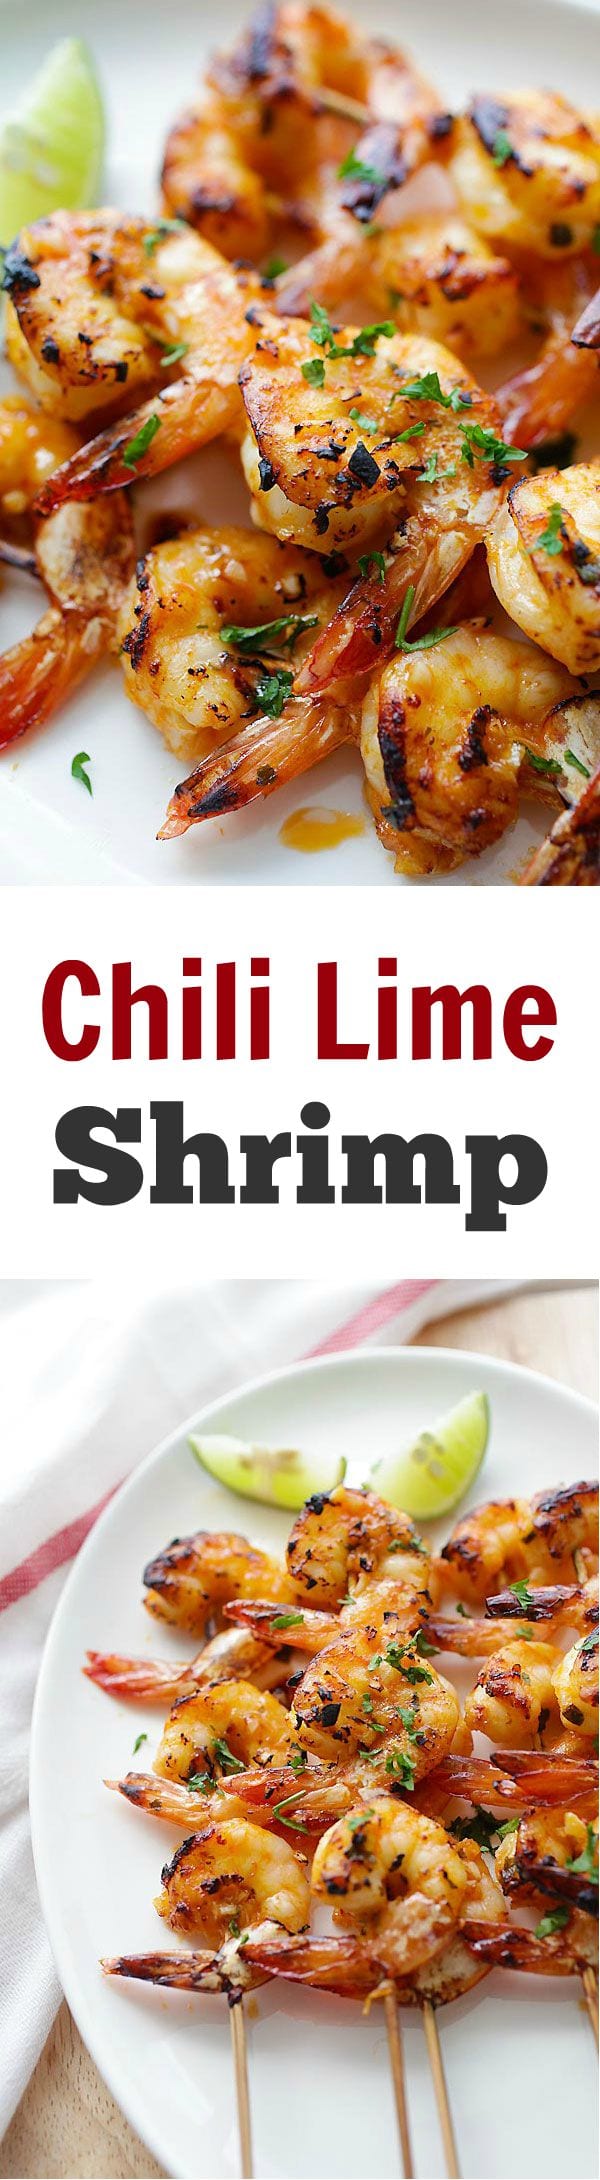 Chili Lime Shrimp - juicy and succulent shrimp marinated with chili and lime and grill/baked to perfection. So good and so easy! | rasamalaysia.com